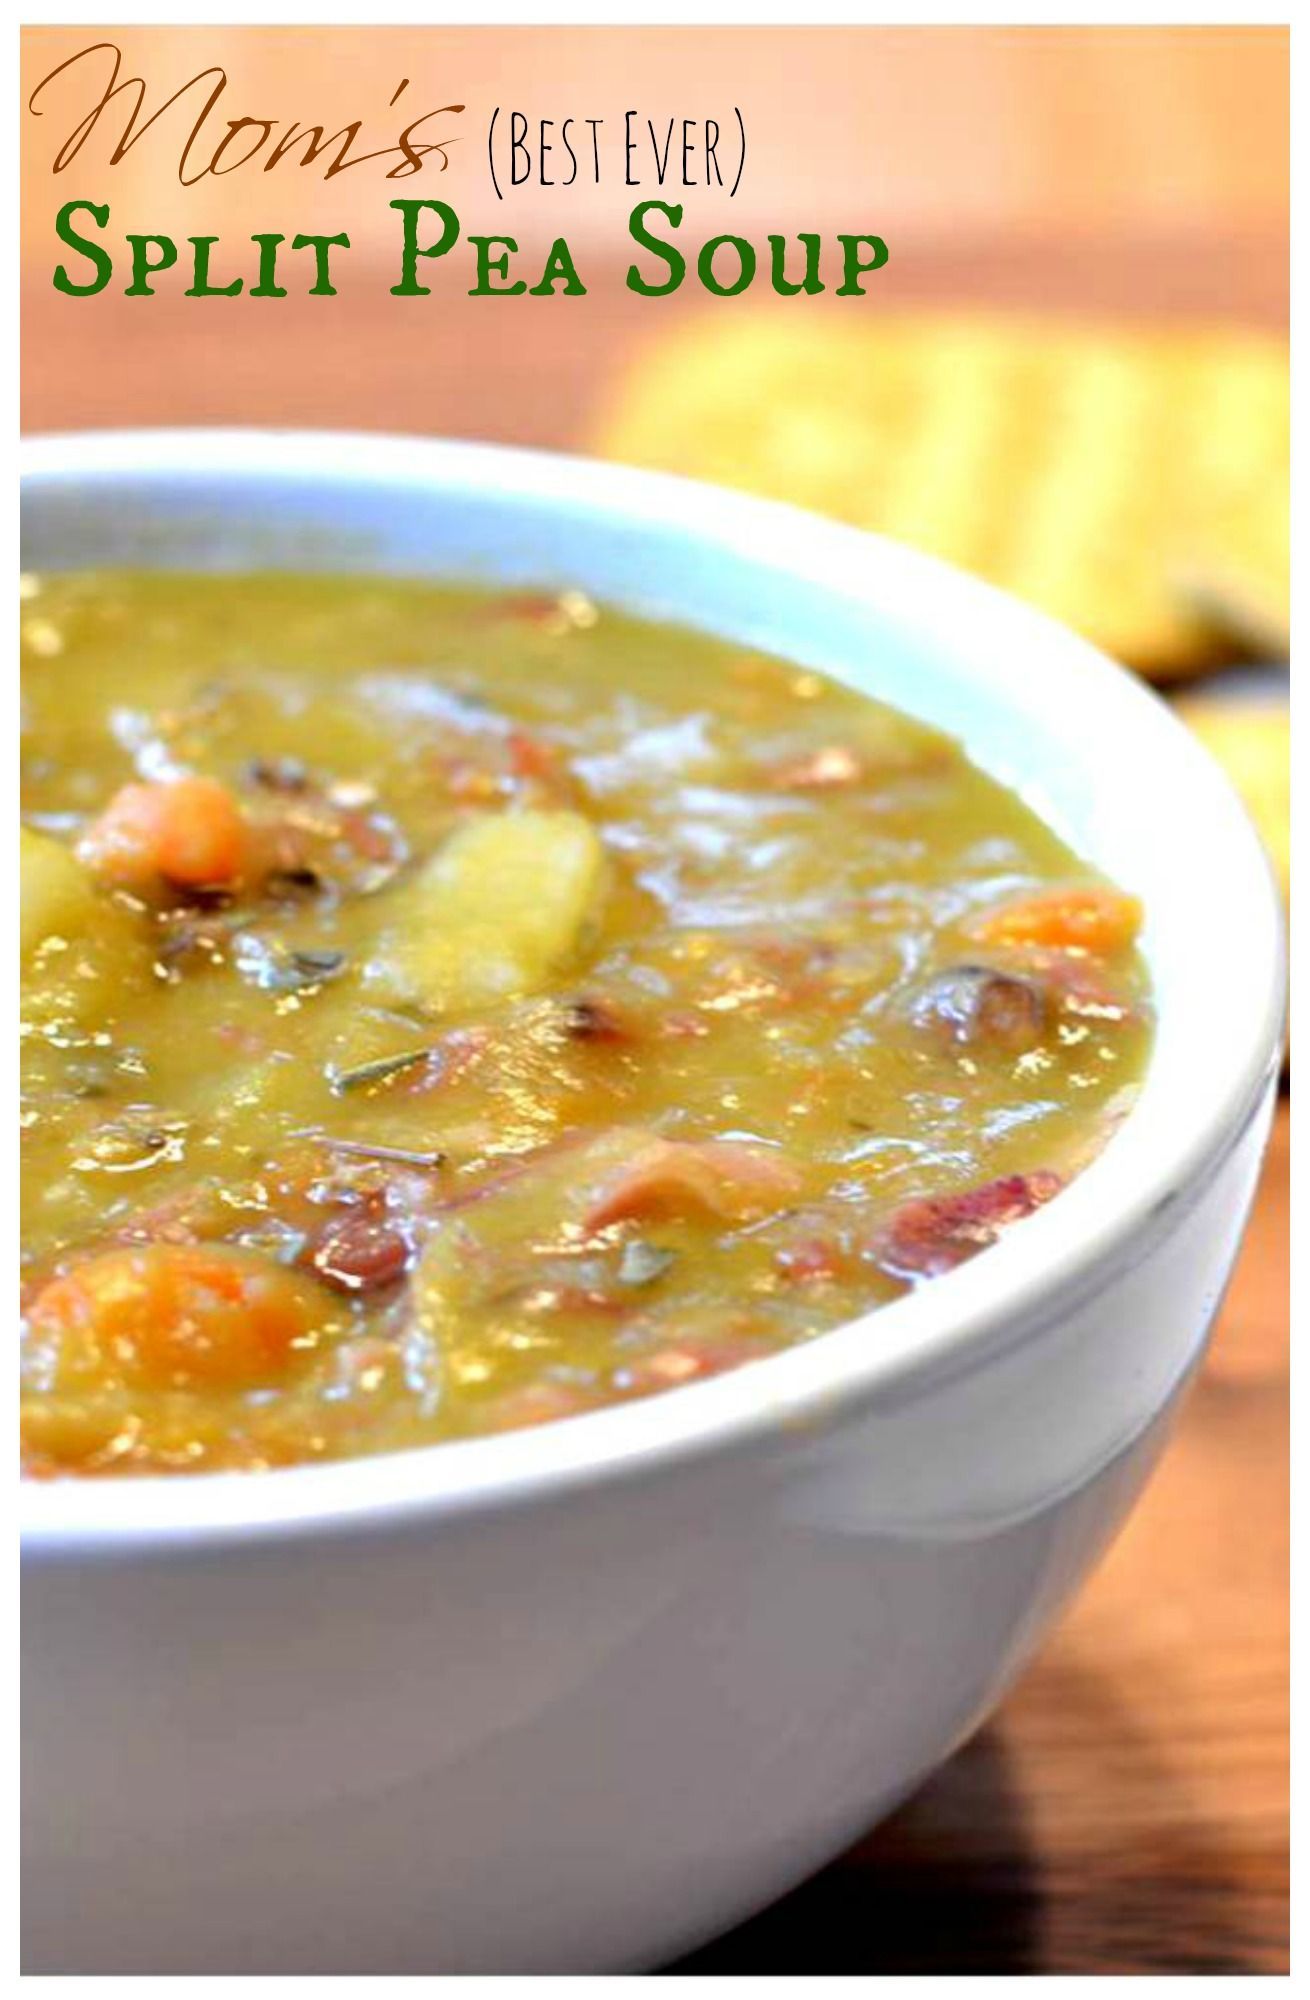 Carrots, onions, potatoes, split peas and ham blend perfectly together in this rich and flavorful soup- the best recipe youll find